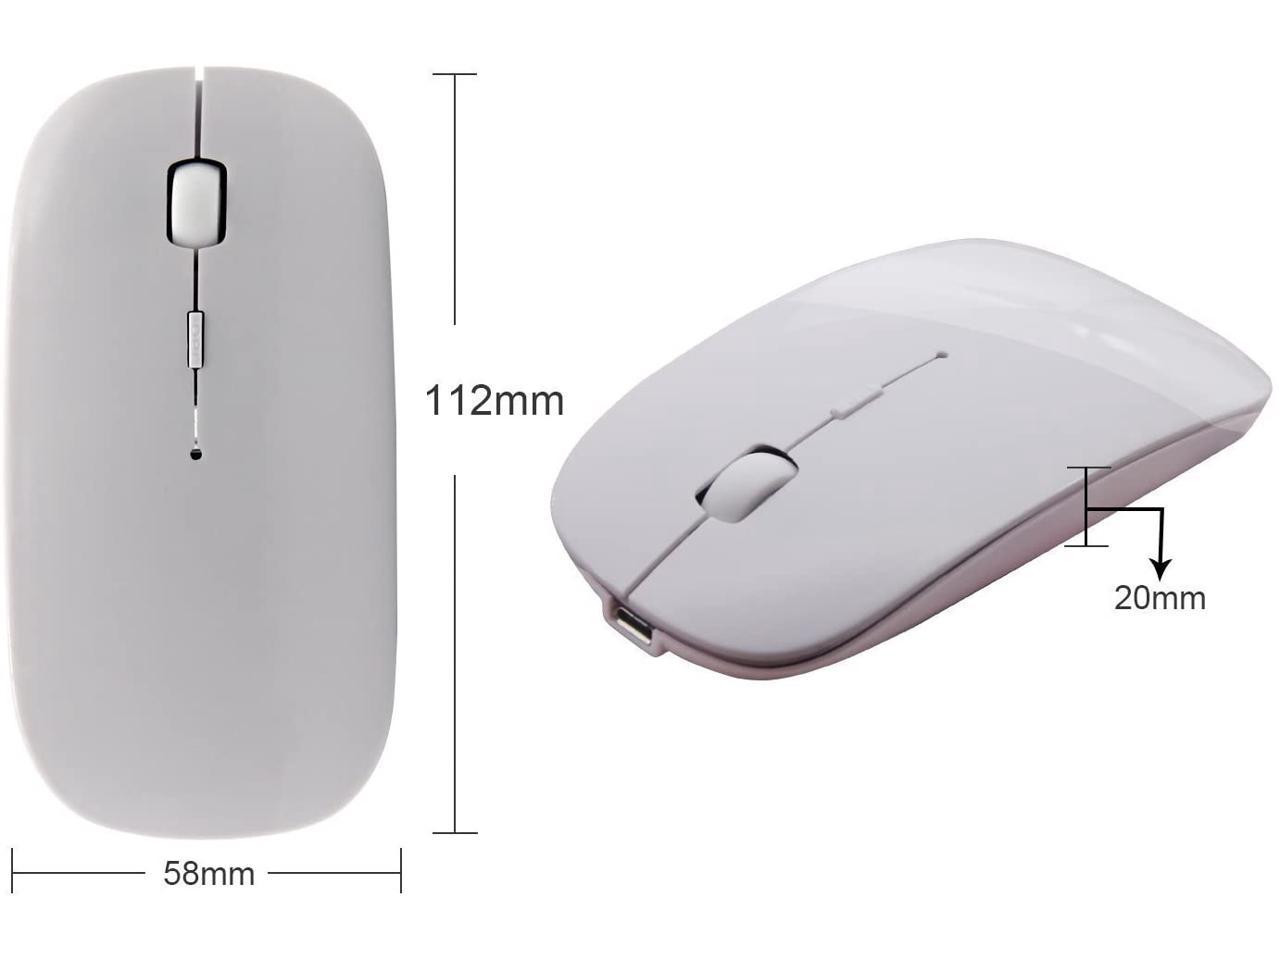 PC Computer,Windows/Android Tablet 3.0 Portable Mouse with Rechargeable Wireless USB Mouse for Notebook Laptop Silver DINOWIN Bluetooth Mouse 